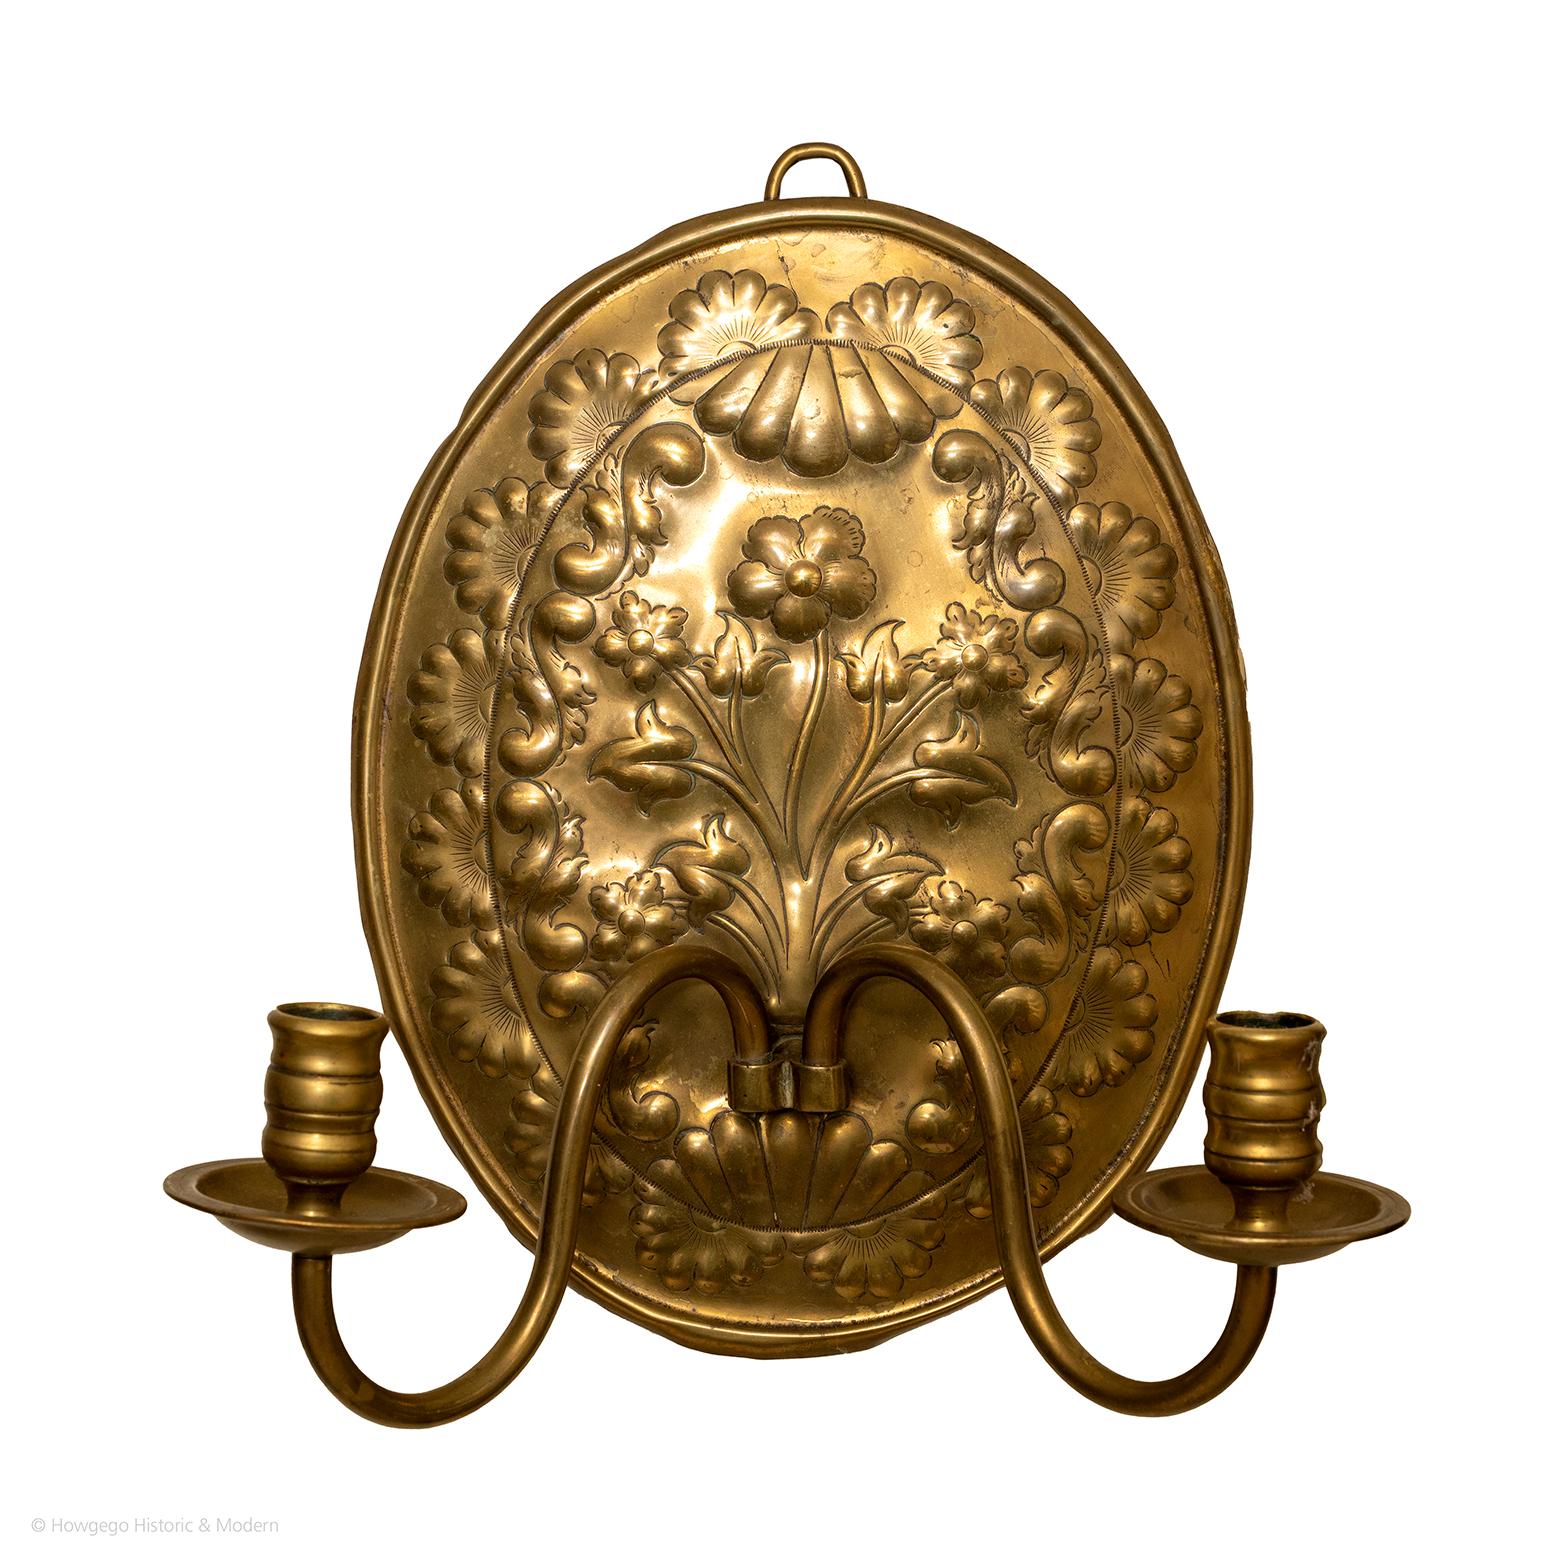 A charming, arts & crafts, oval, brass repousse wall sconce with floral & leaf ornament & two arms
- Naïve charm with a stylised floral arrangements surrounded by scrollwork and an outer border of flowerheads
Blends and sit comfortably in period,